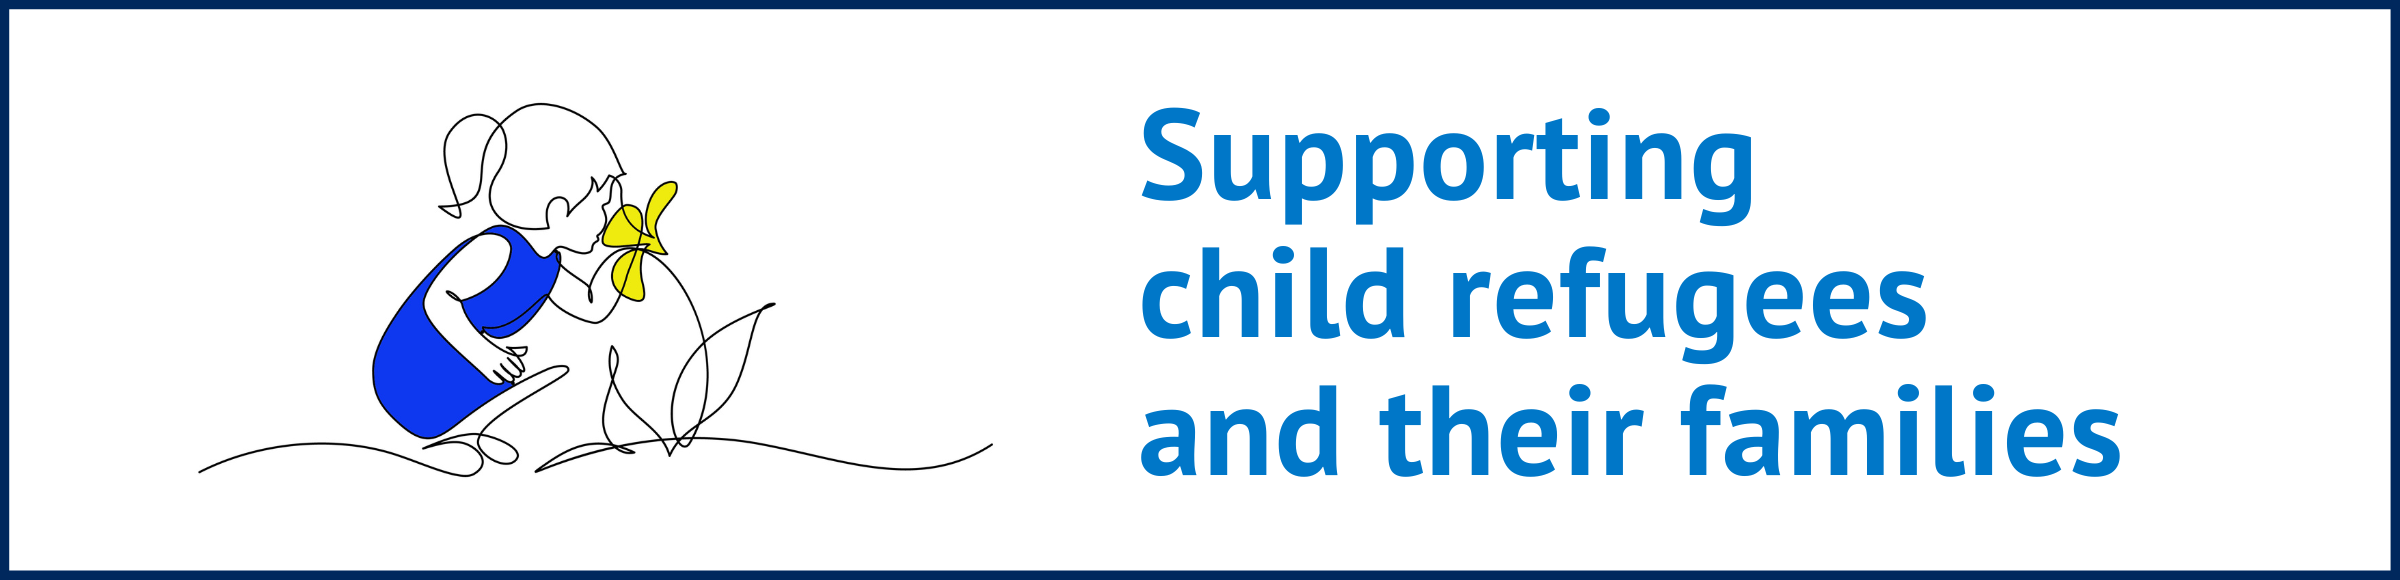 Our new online resource to help people in Scotland working with and supporting children and families in a professional, voluntary or personal capacity, and across Europe.